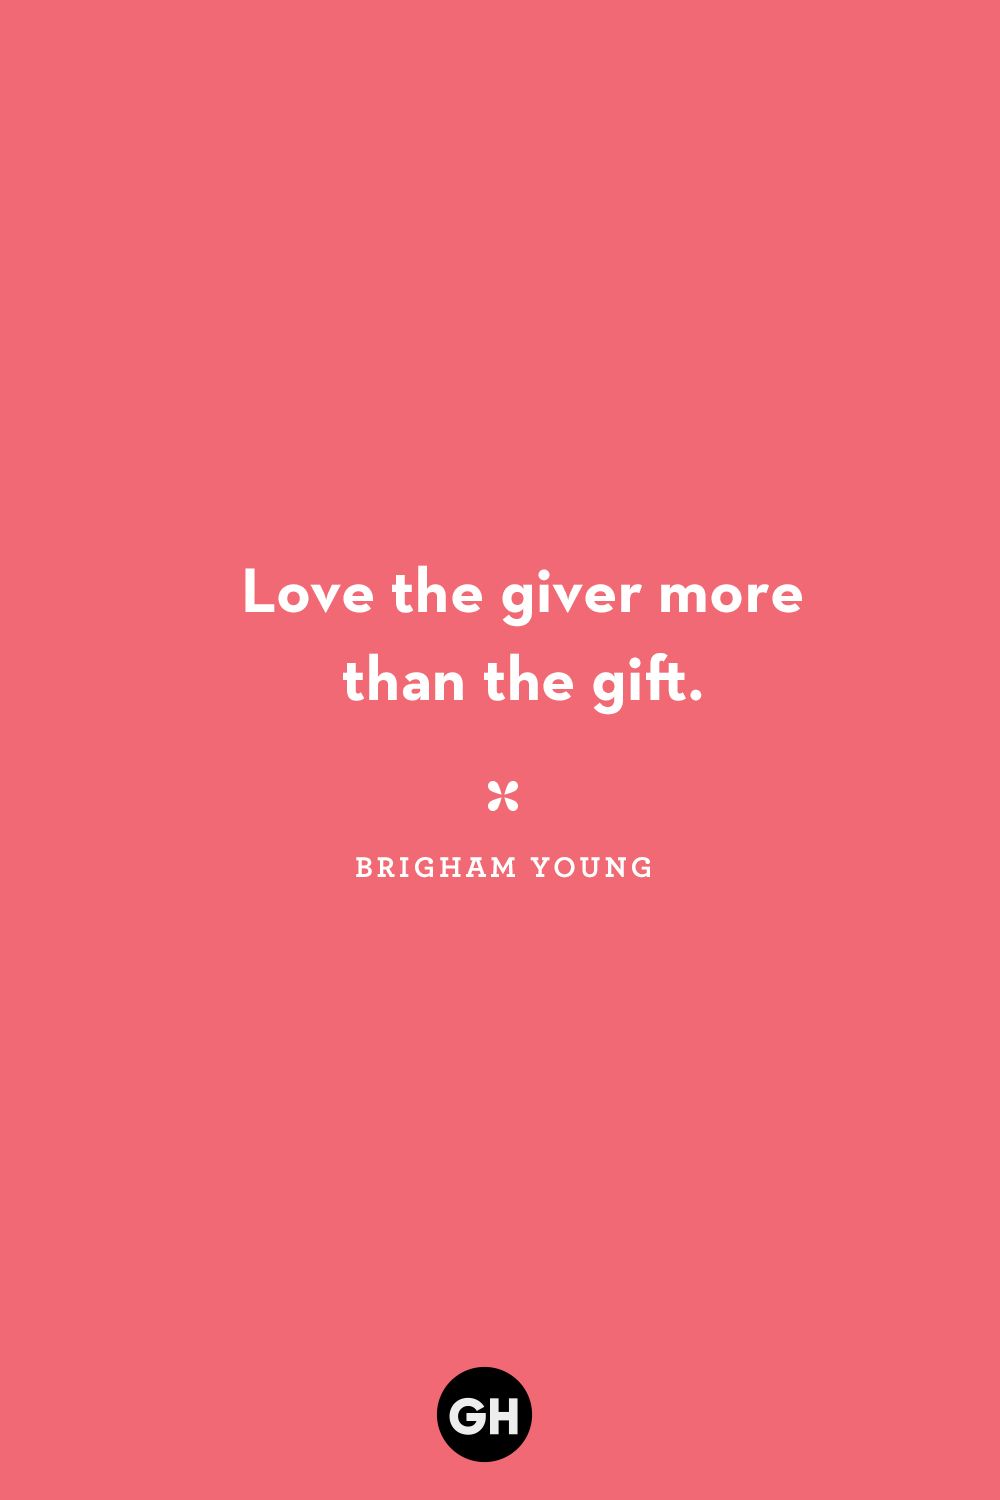 35 Best Giving Quotes - Joy of Giving Quotes and Sayings